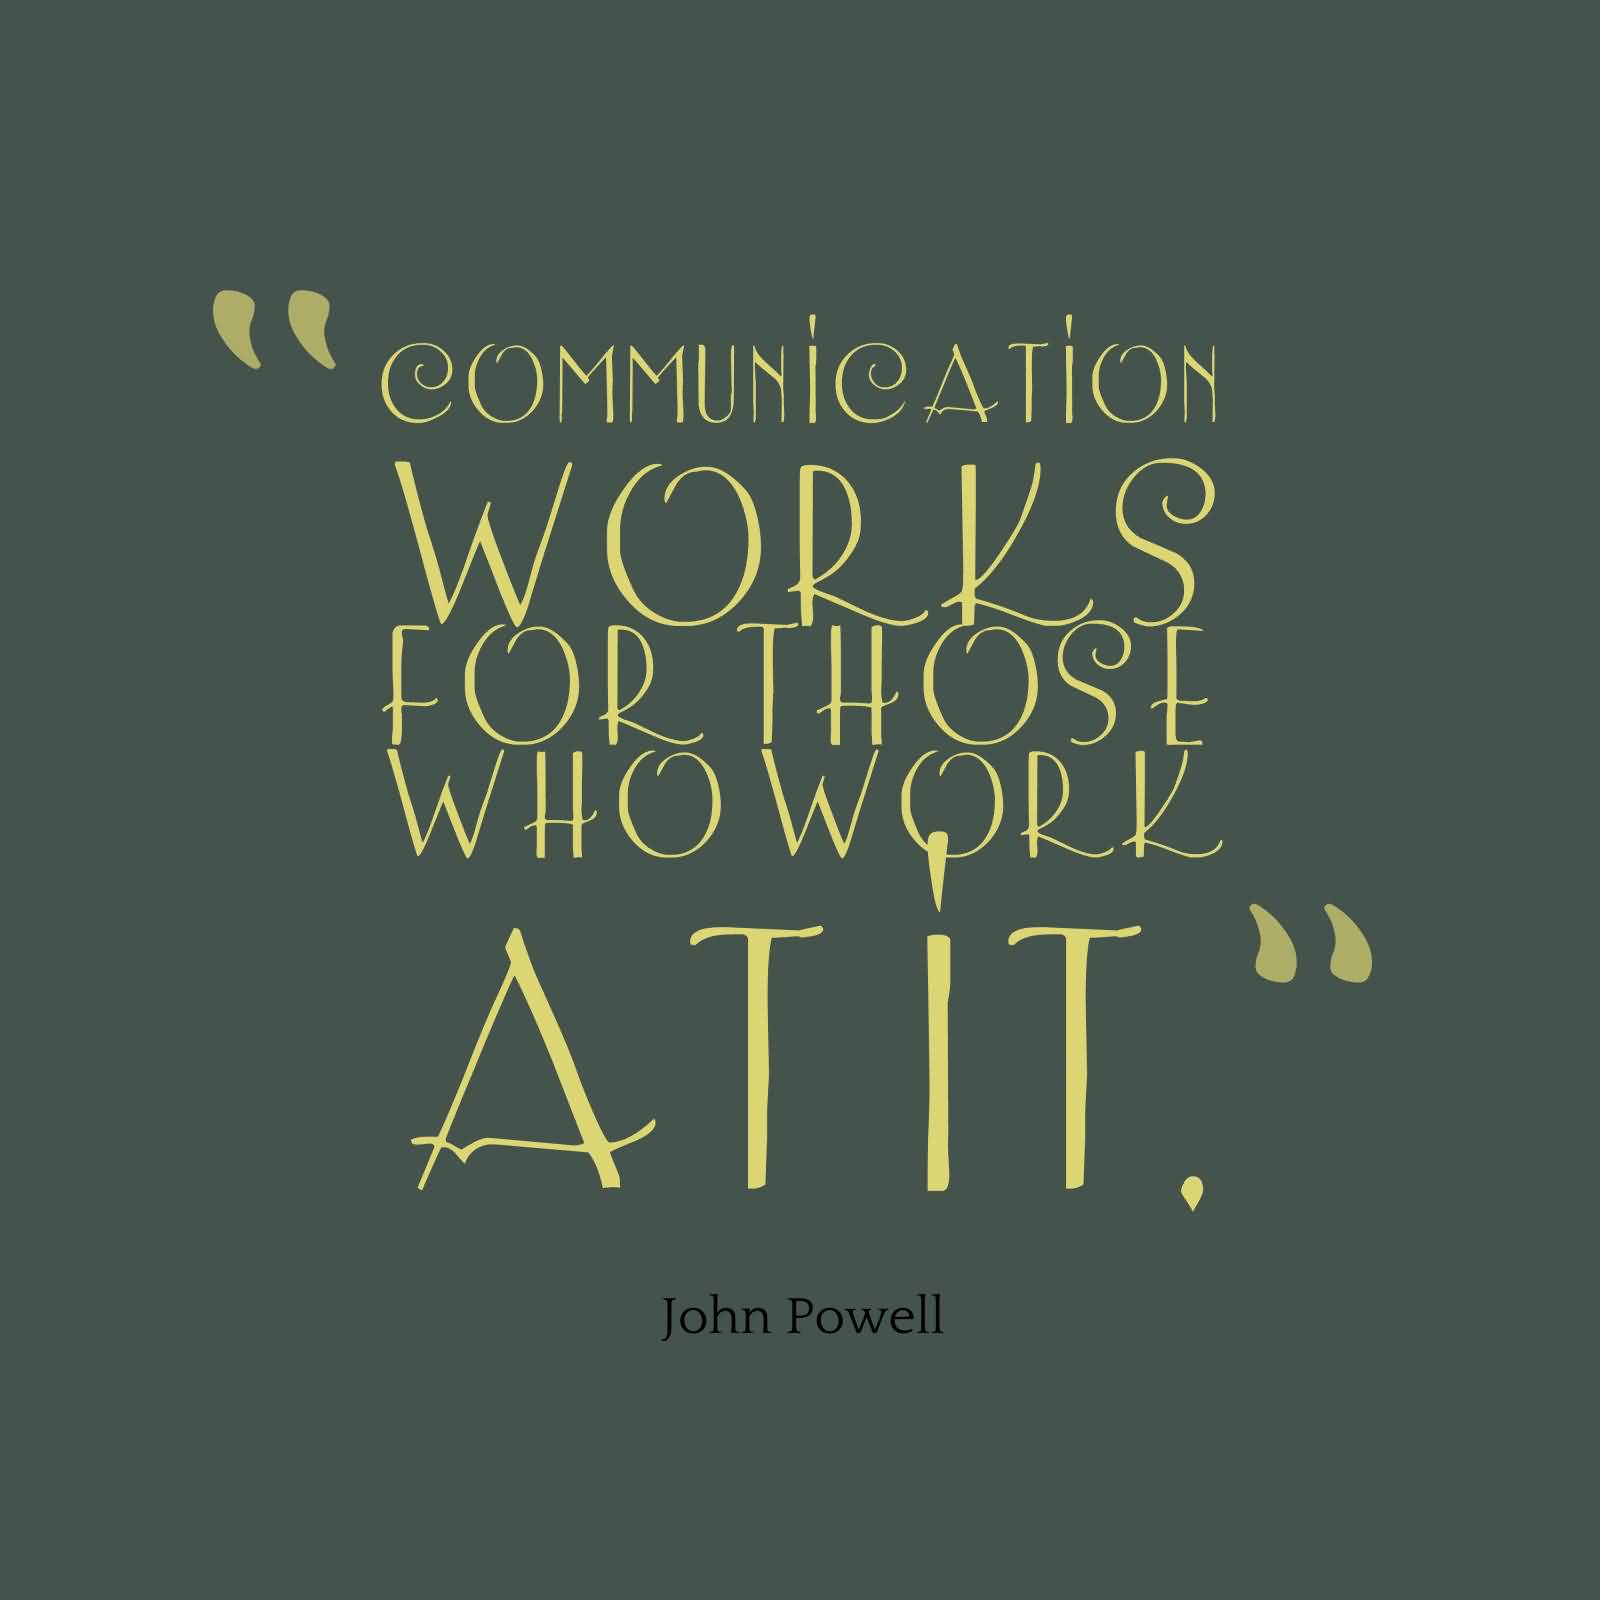 Communication Works For Those Who Work At It. John Powell